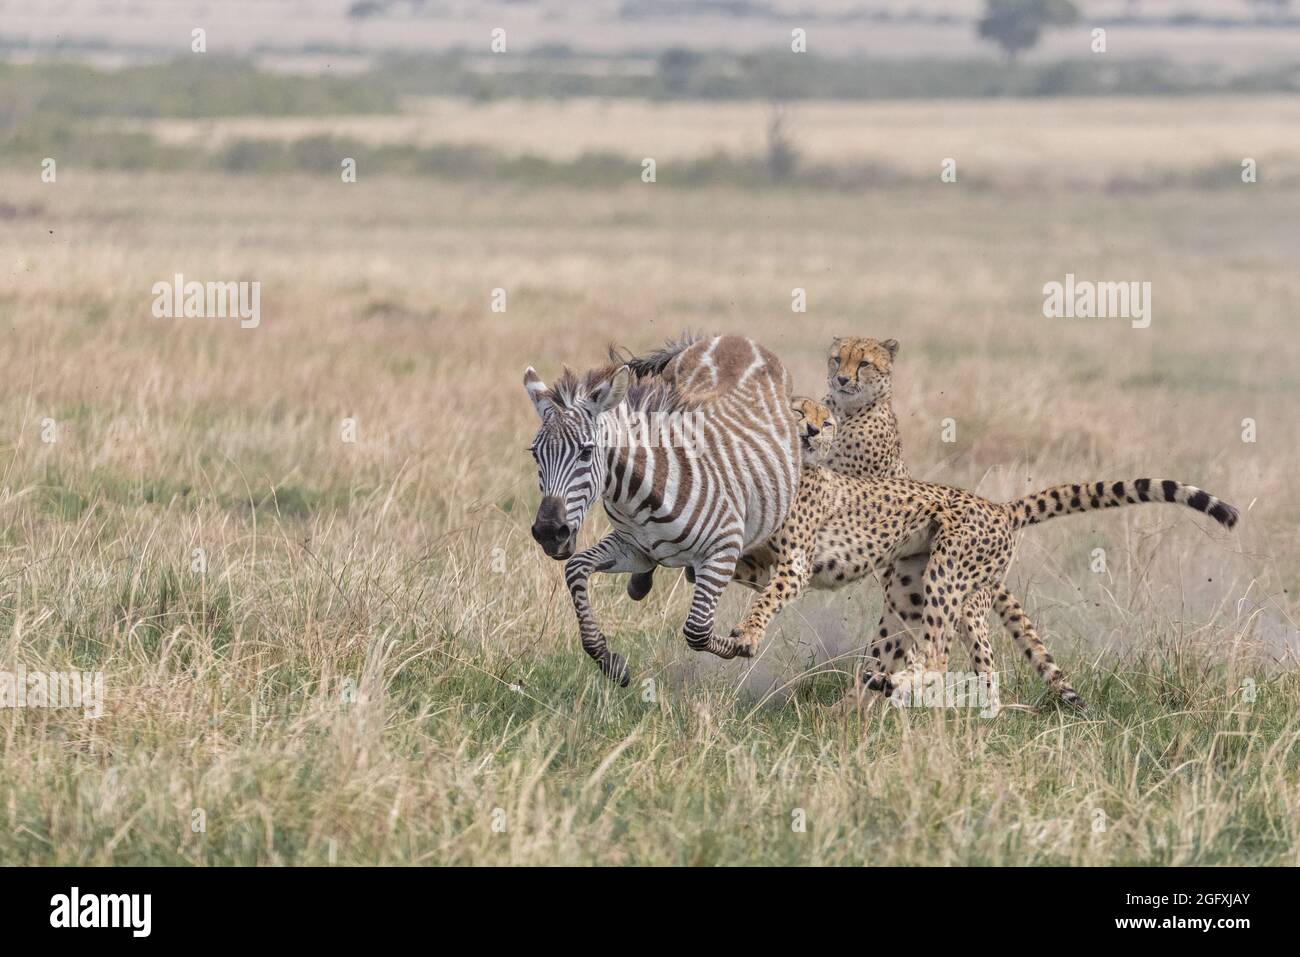 The zebra is unable to flee from two pursuers. MAASAI MARA, KENYA: THRILLING photographs have captured the moment a coalition of cheetahs chased down Stock Photo